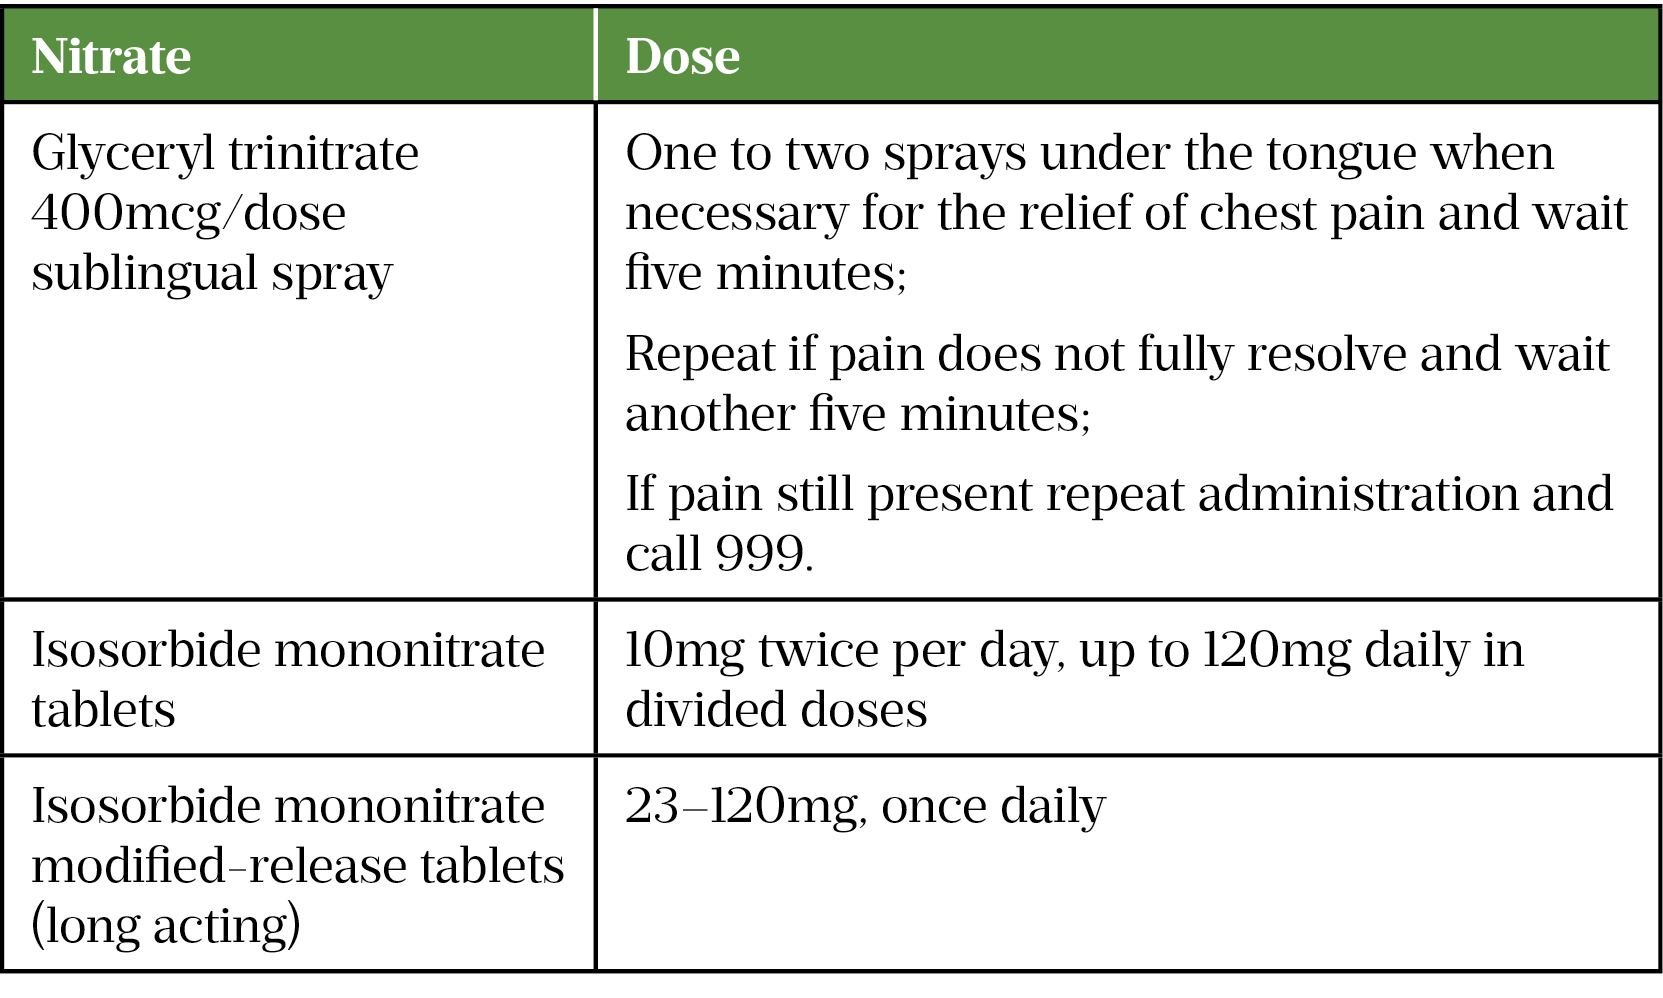 Table 5: Doses for various nitrate preparations